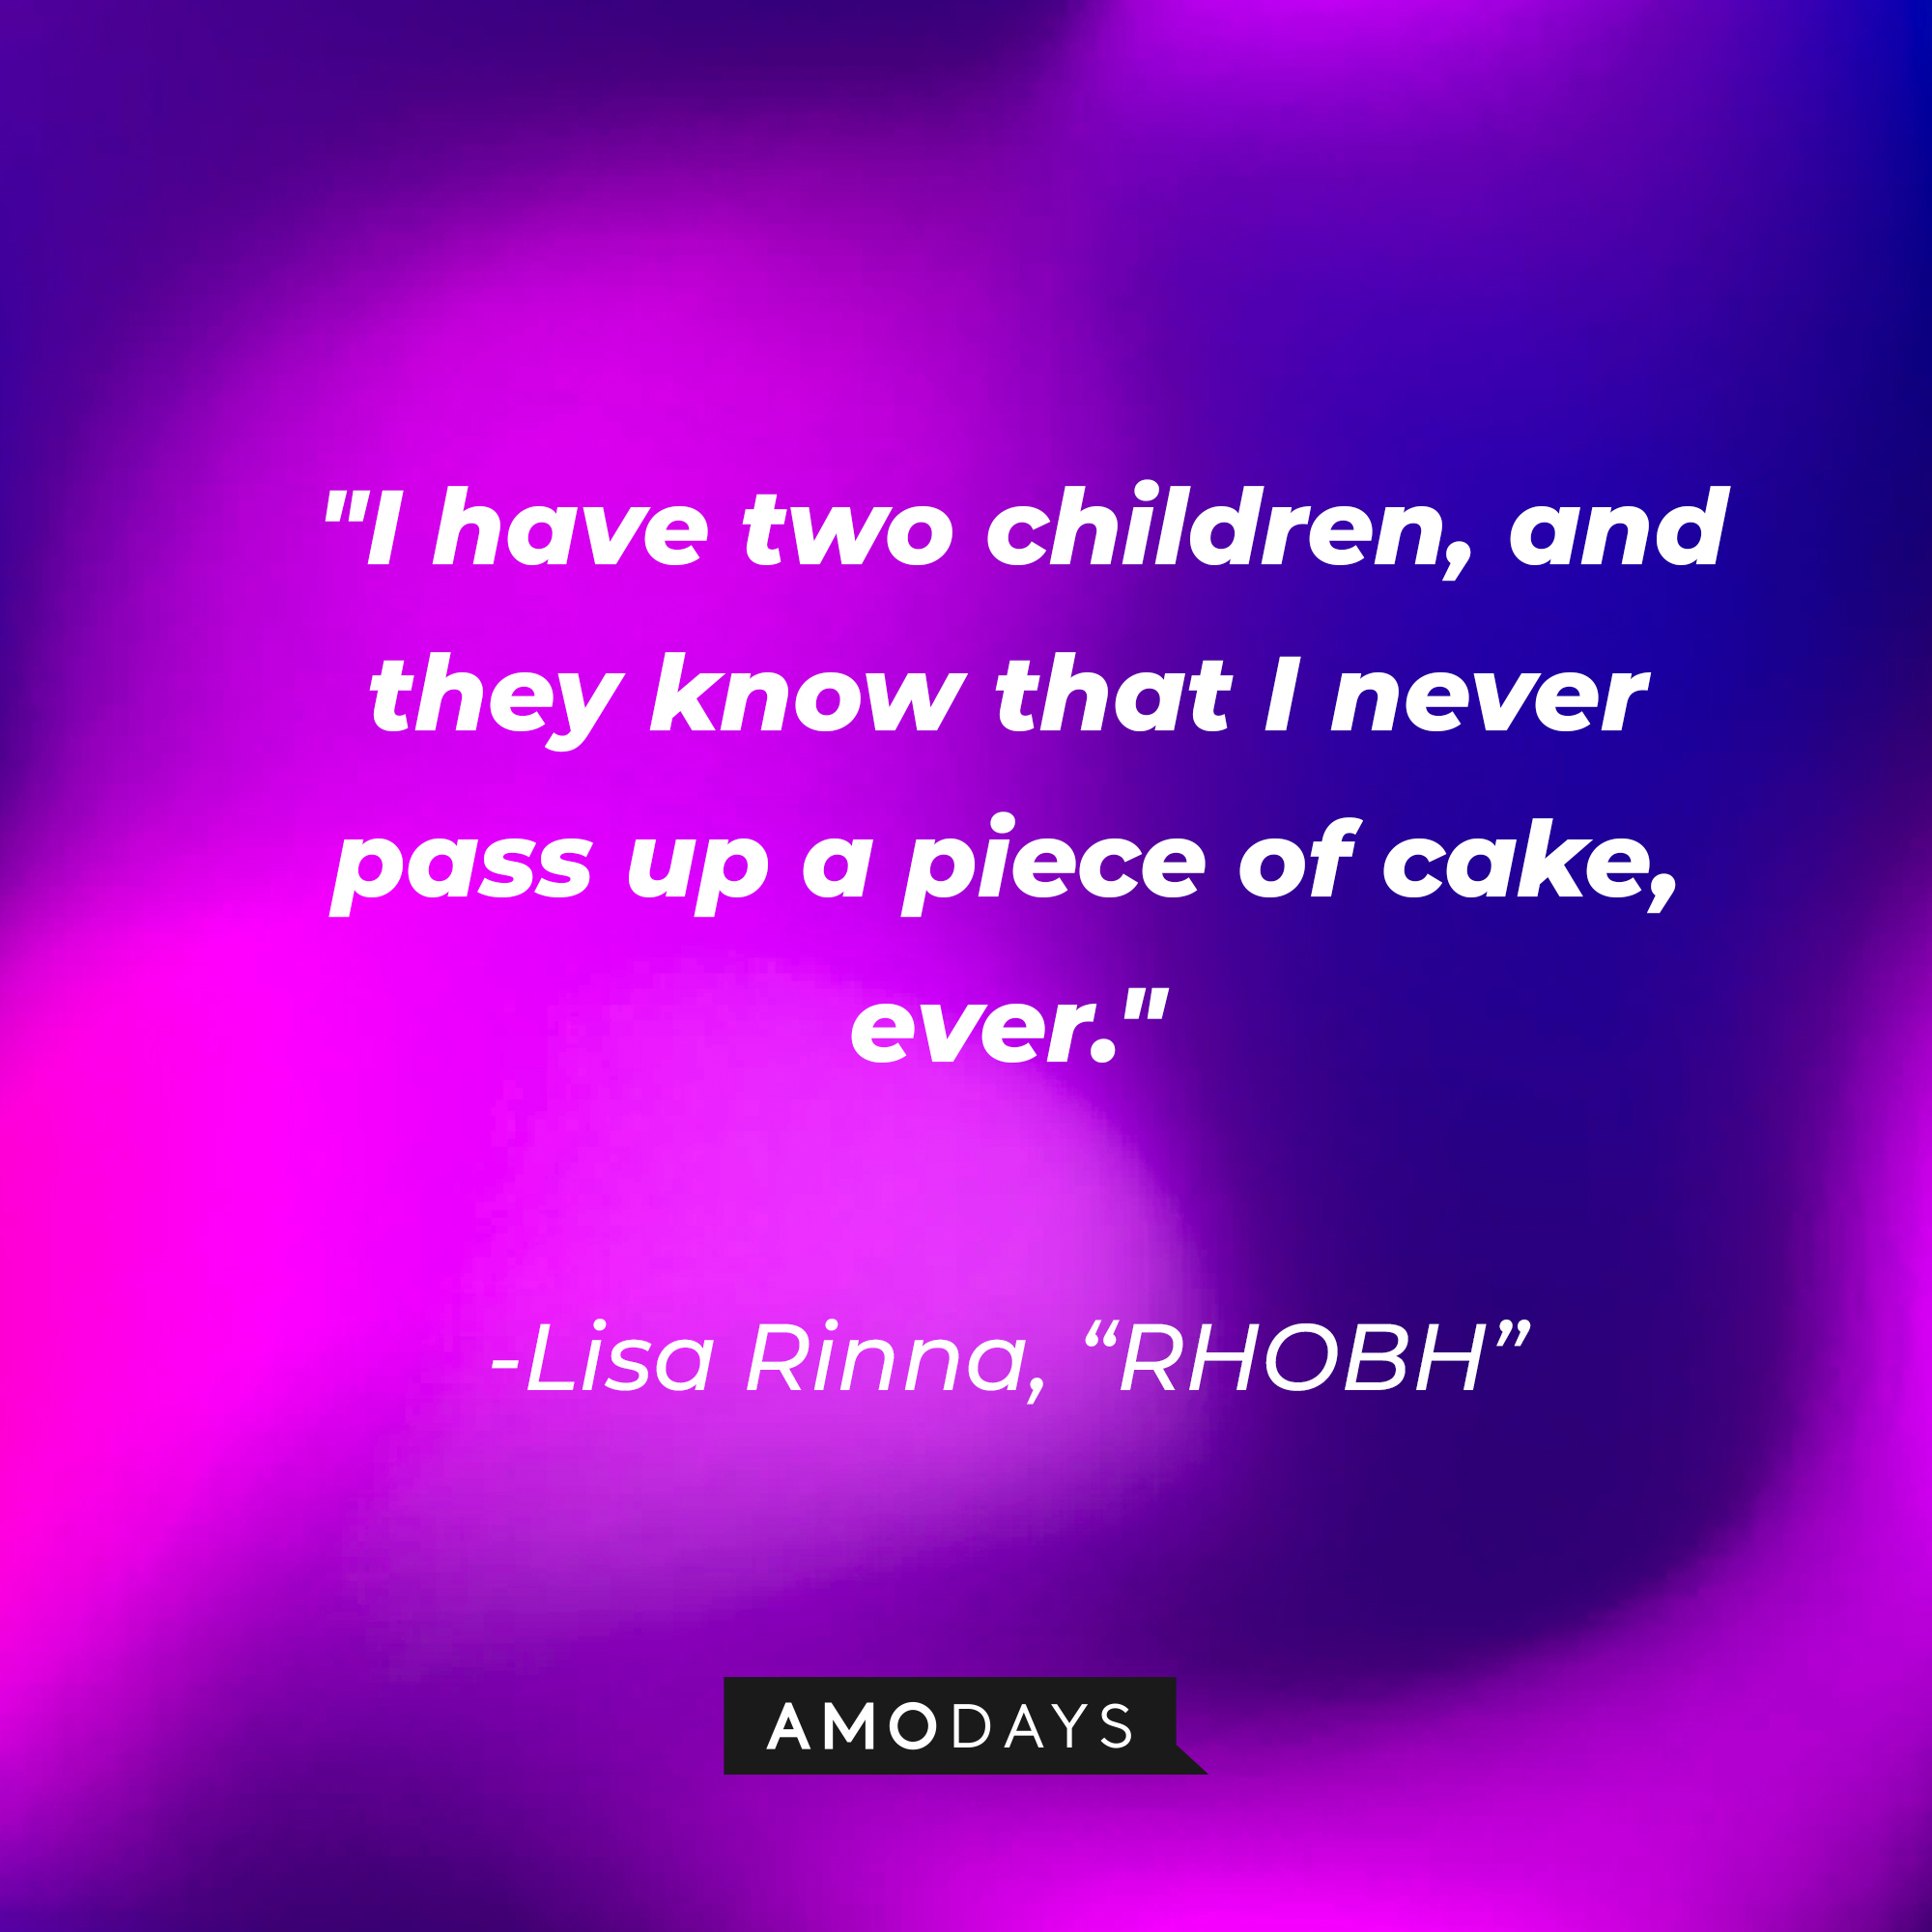 Lisa Rinna's quote from "The Real Housewives of Beverly Hills:" "I have two children, and they know that I never pass up a piece of cake, ever." | Source: AmoDays